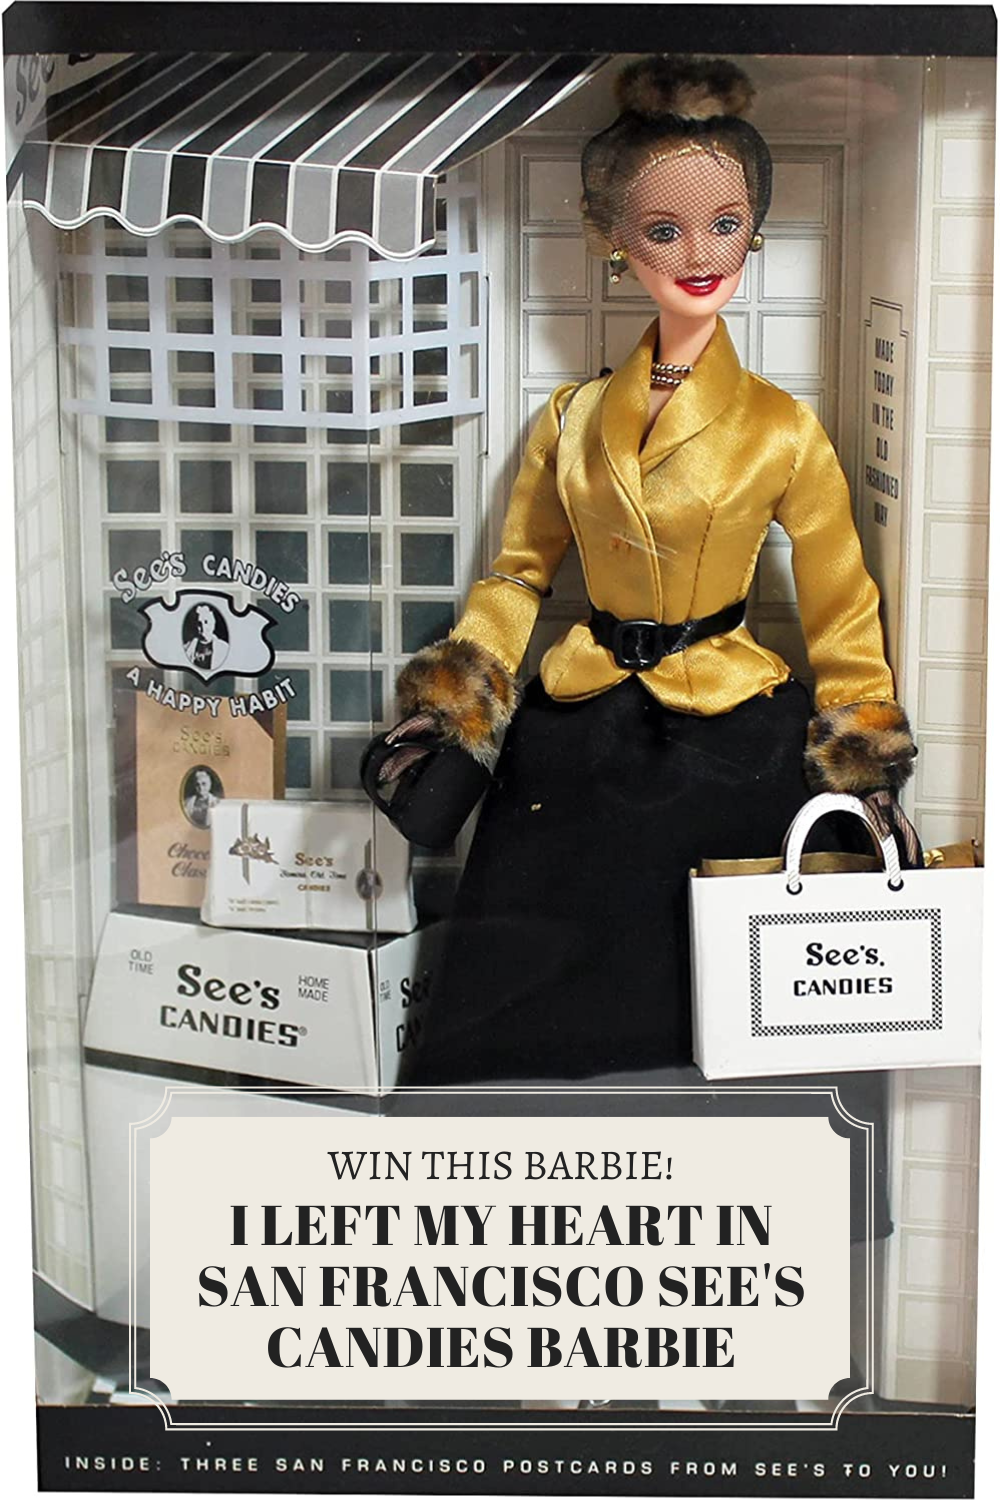 I Left My Heart in San Francisco See's Candies Barbie Giveaway